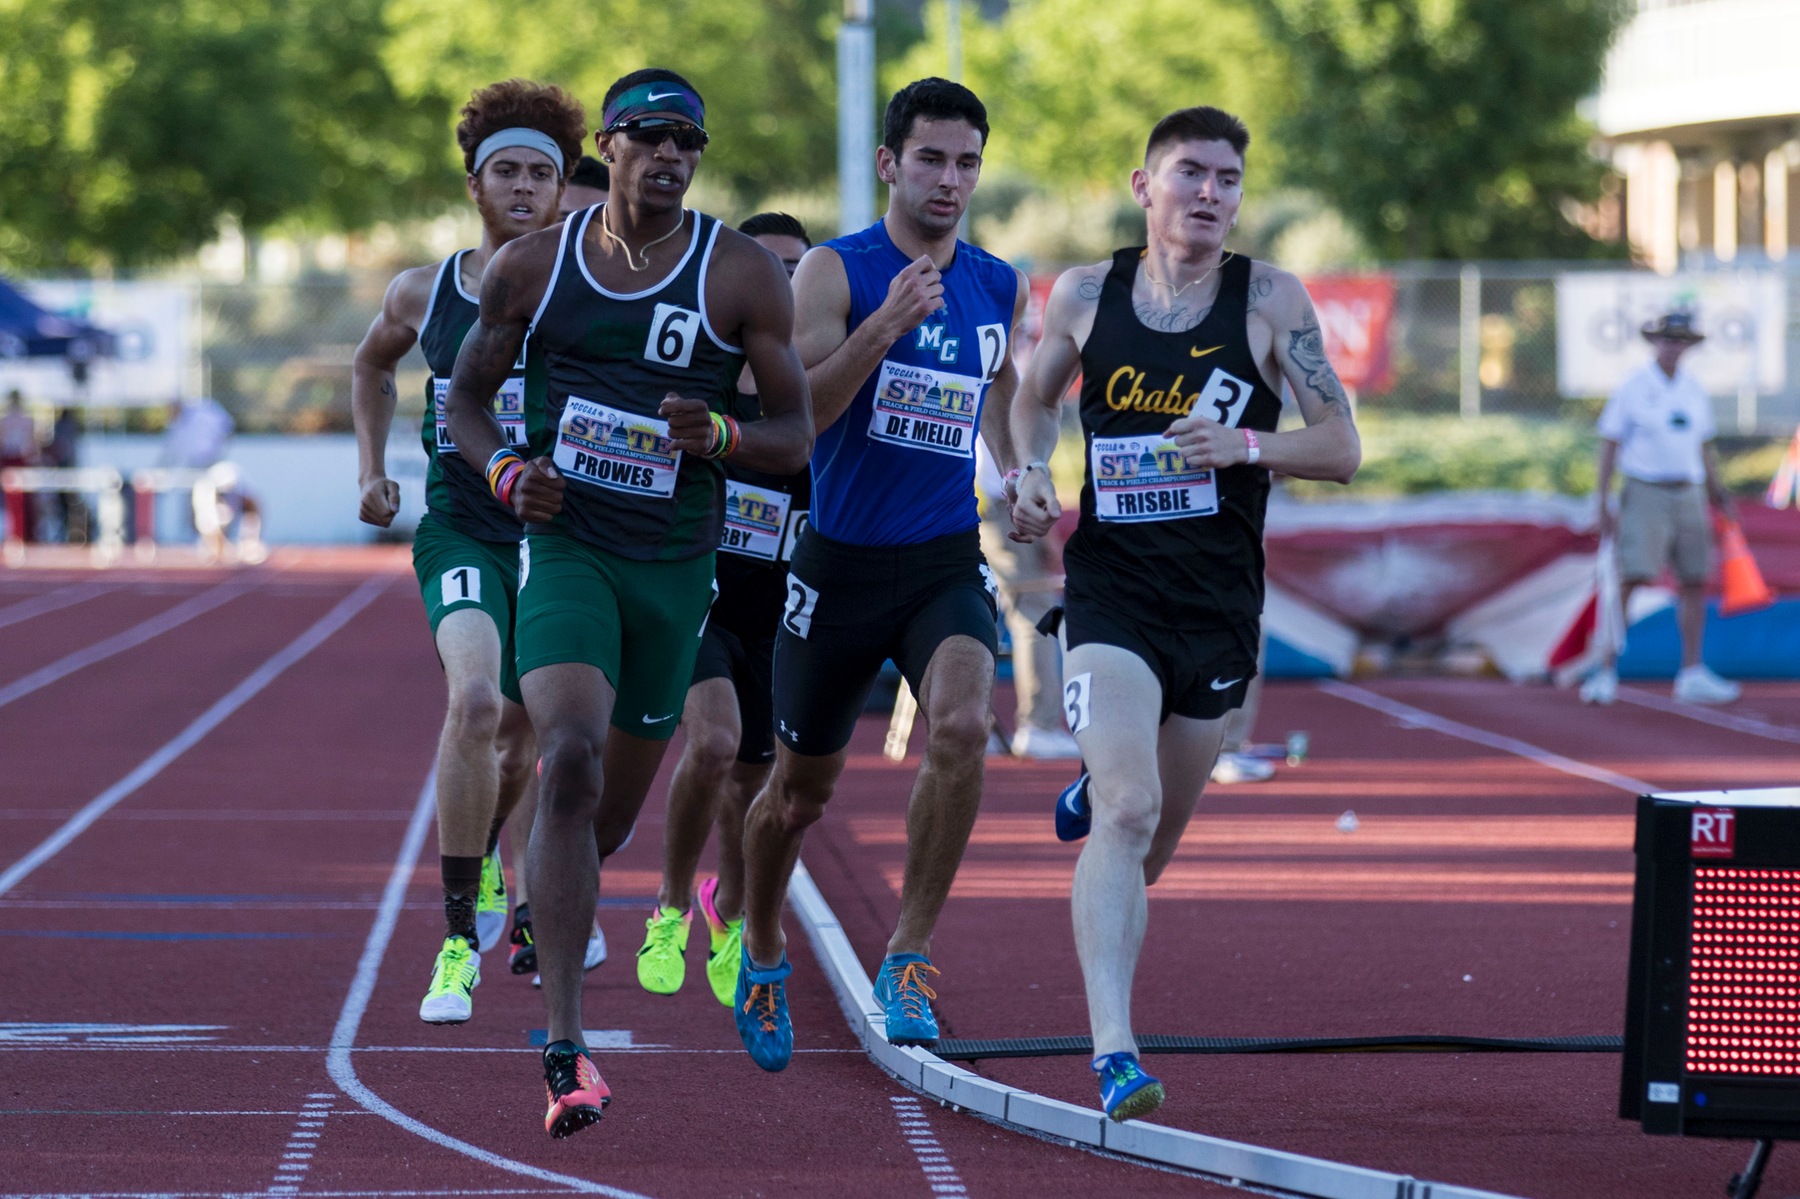 Antwuin Prowes, Diablo Valley College at the 2017 CCCAA State Championships. Photo by David Sanborn